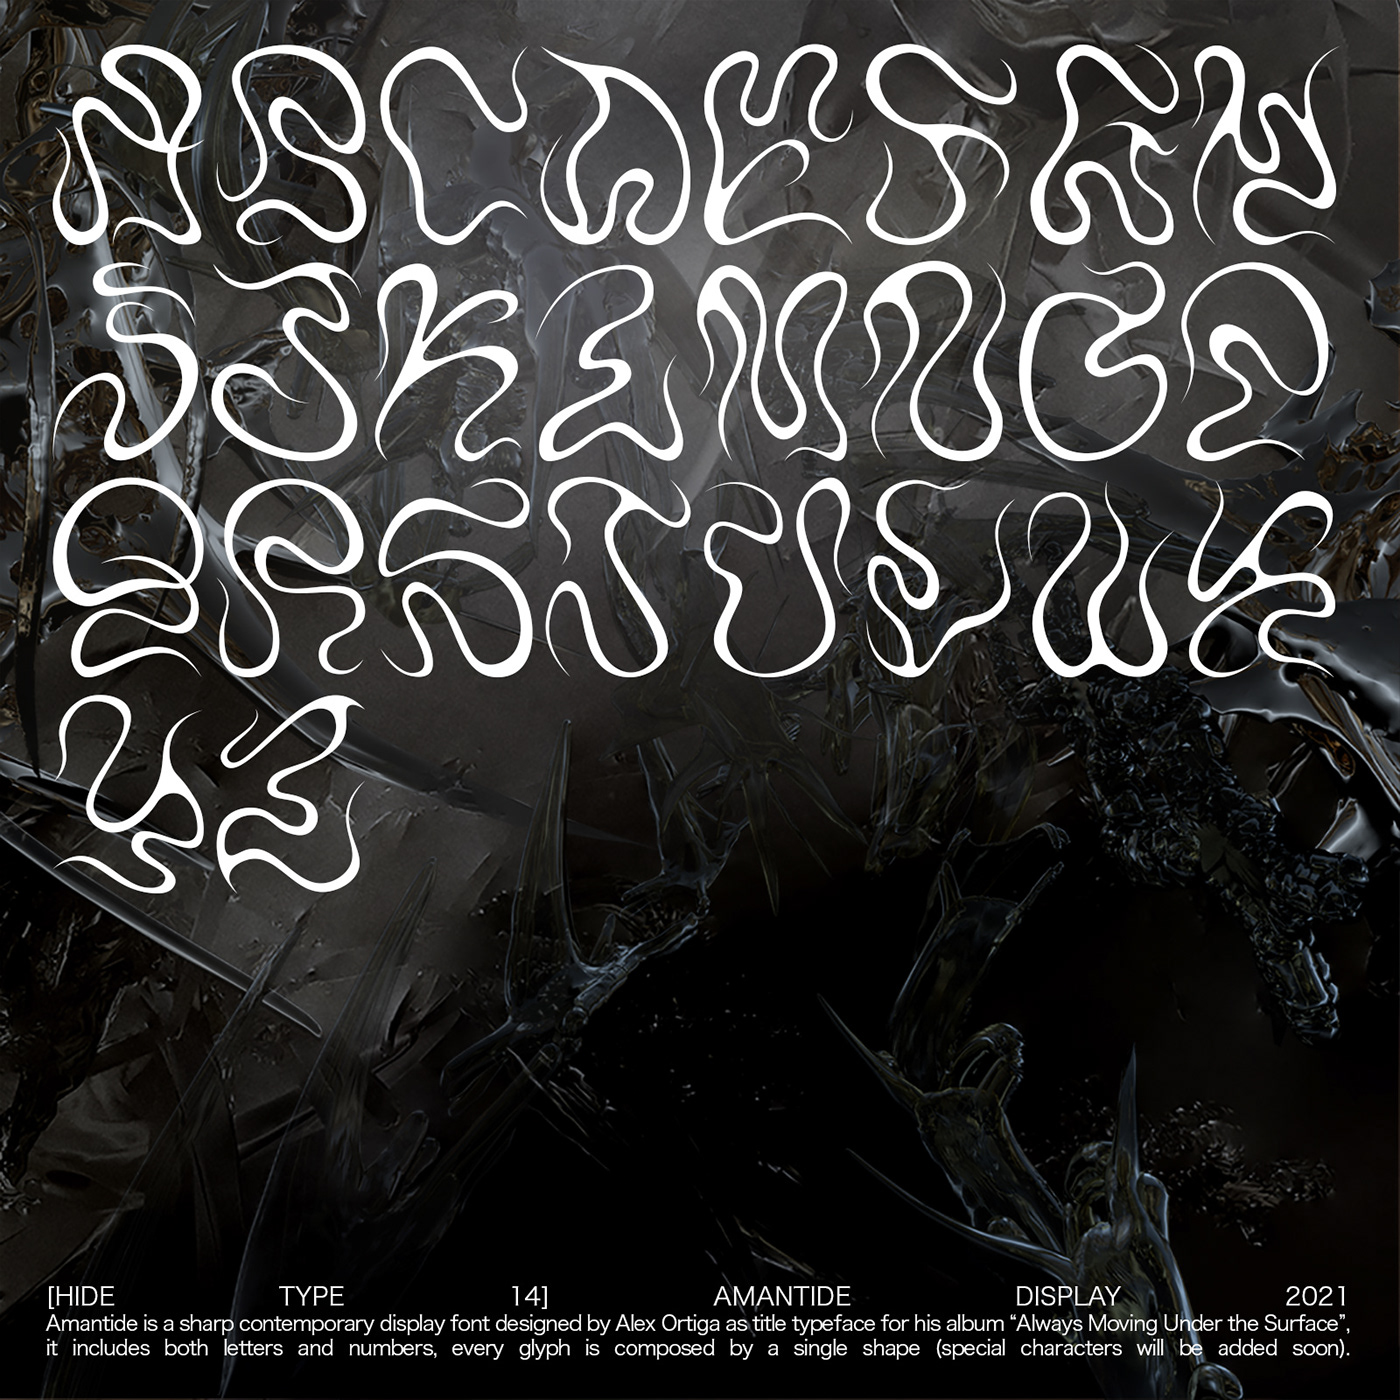 abstract font Experimental font font NEW GRAPHICS type type design Typeface weird design